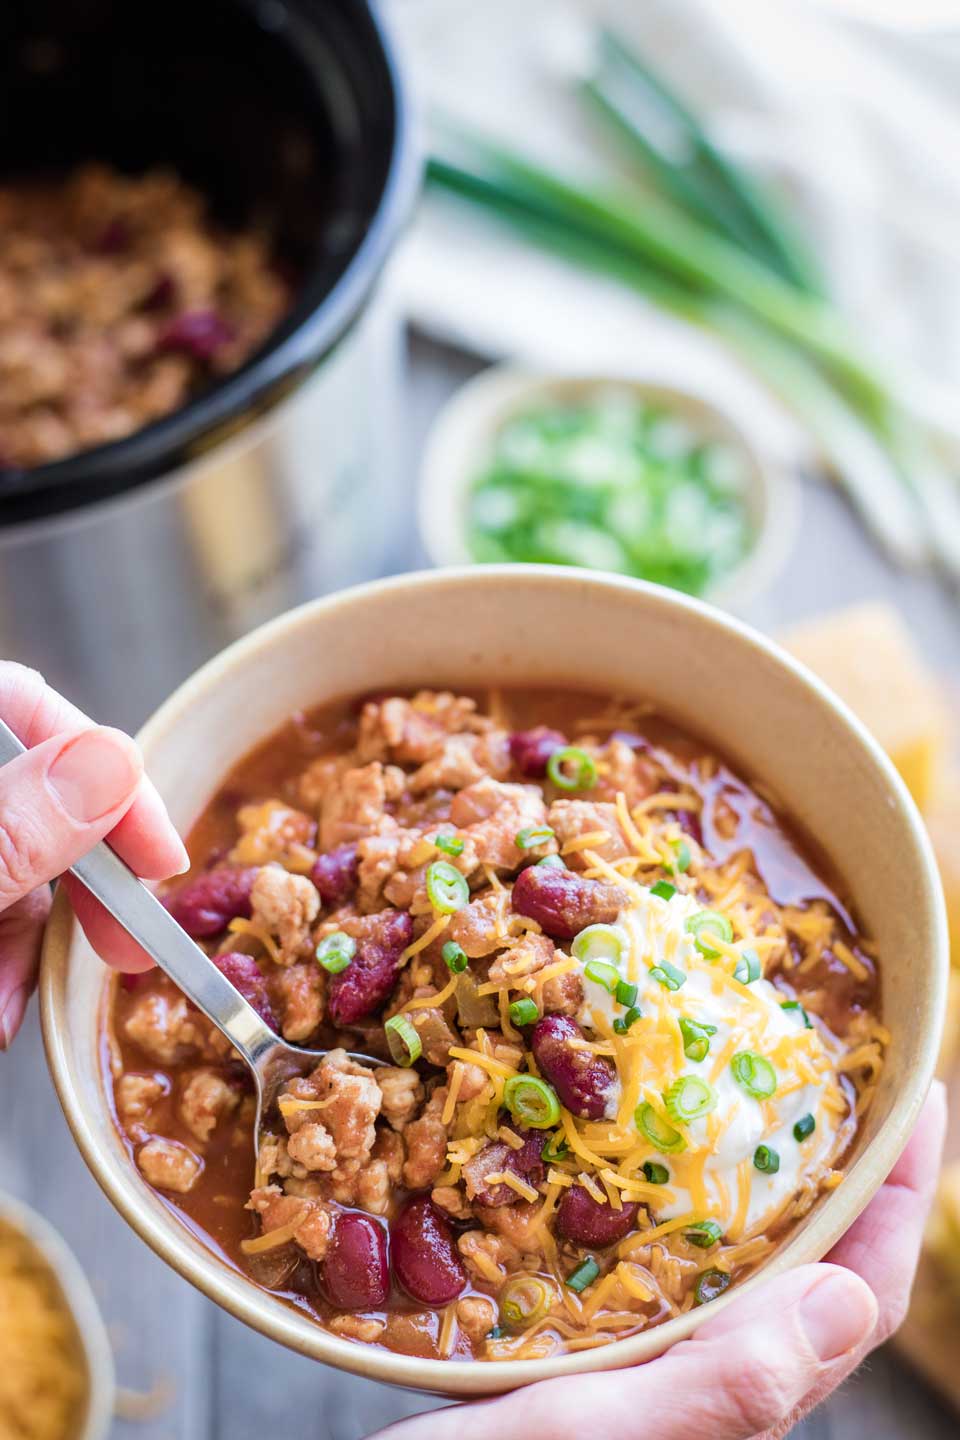 hand cradling bowl of turkey chili as another hands digs in with a spoon